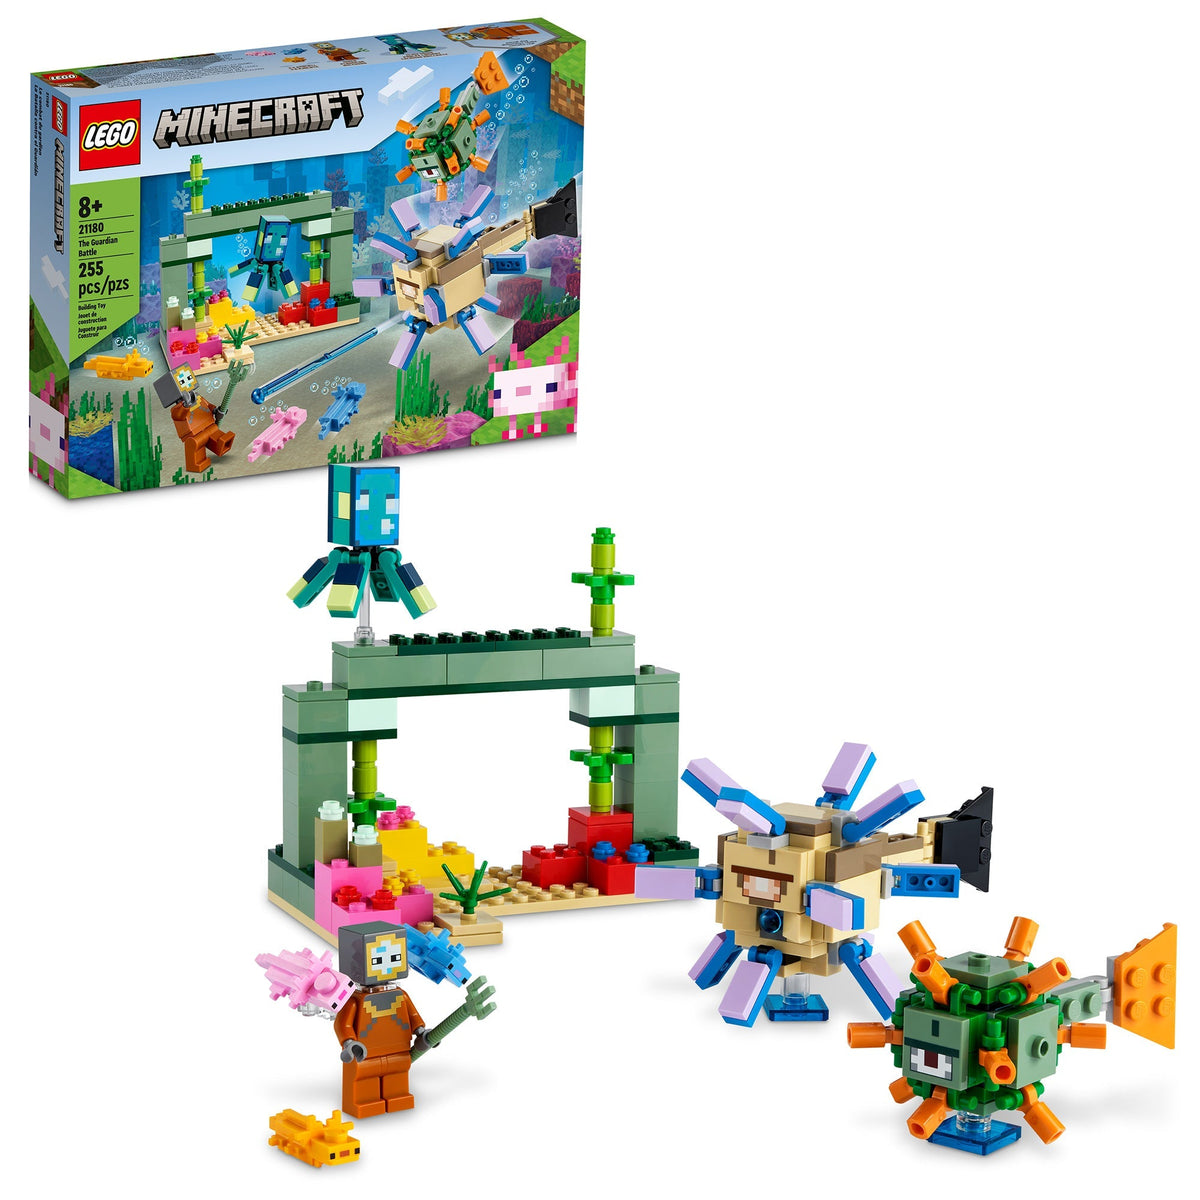 LEGO Toys & Games LEGO Minecraft The Guardian Battle, 21180, Ages 8+, 255 Pieces 673419358514